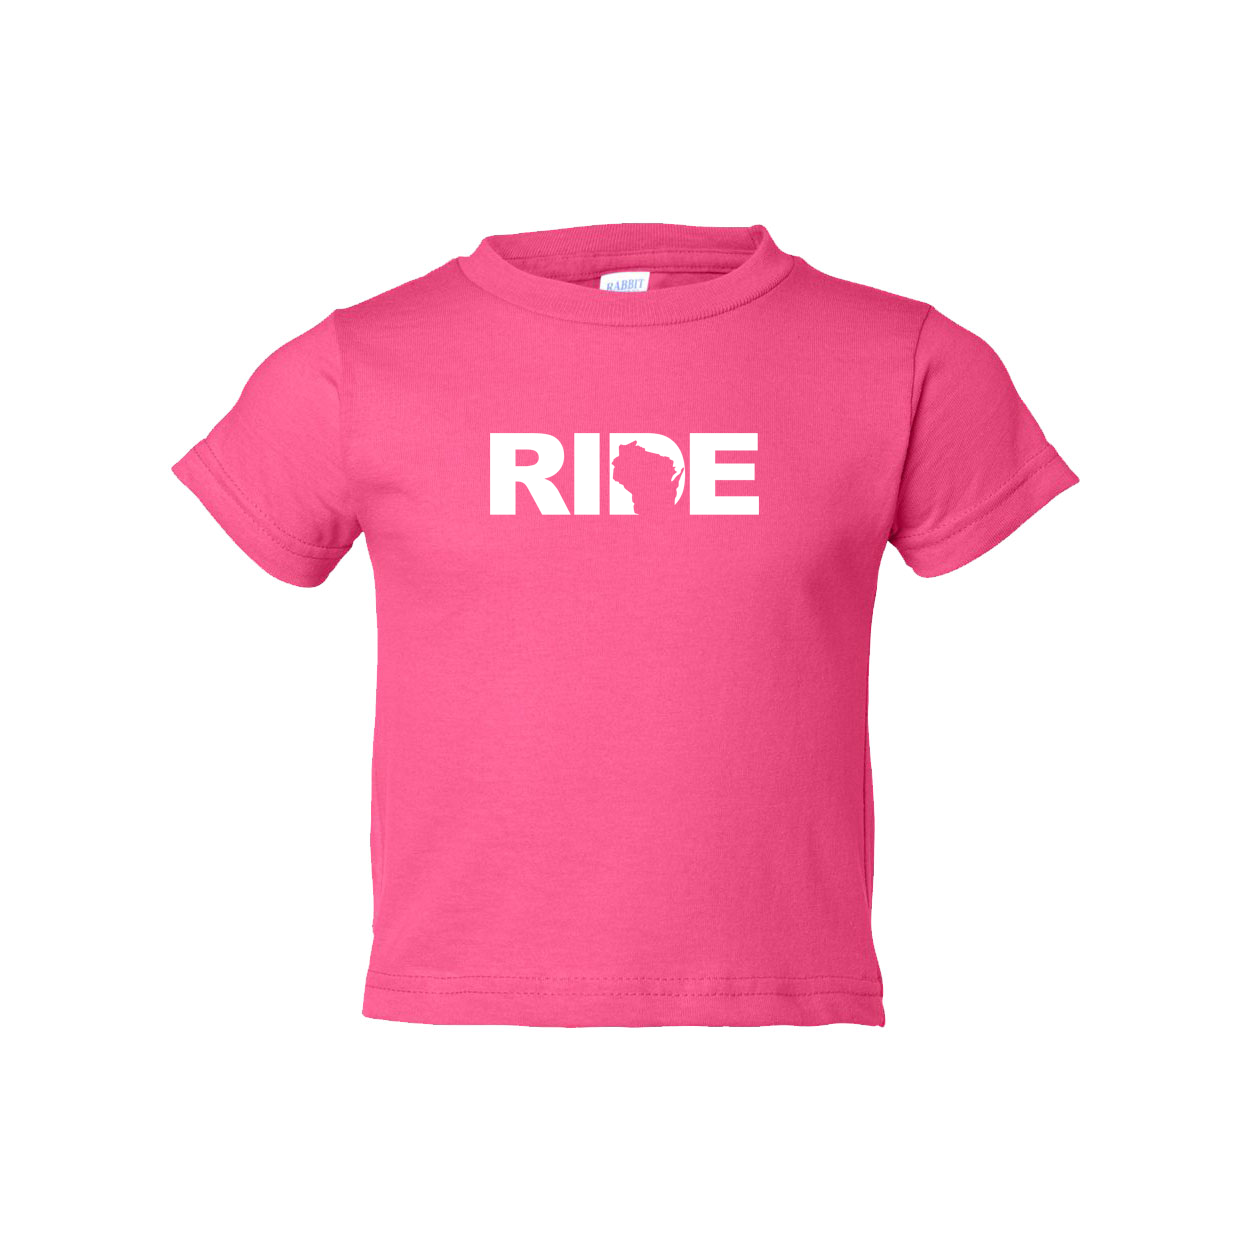 Ride Wisconsin Classic Toddler T-Shirt Pink